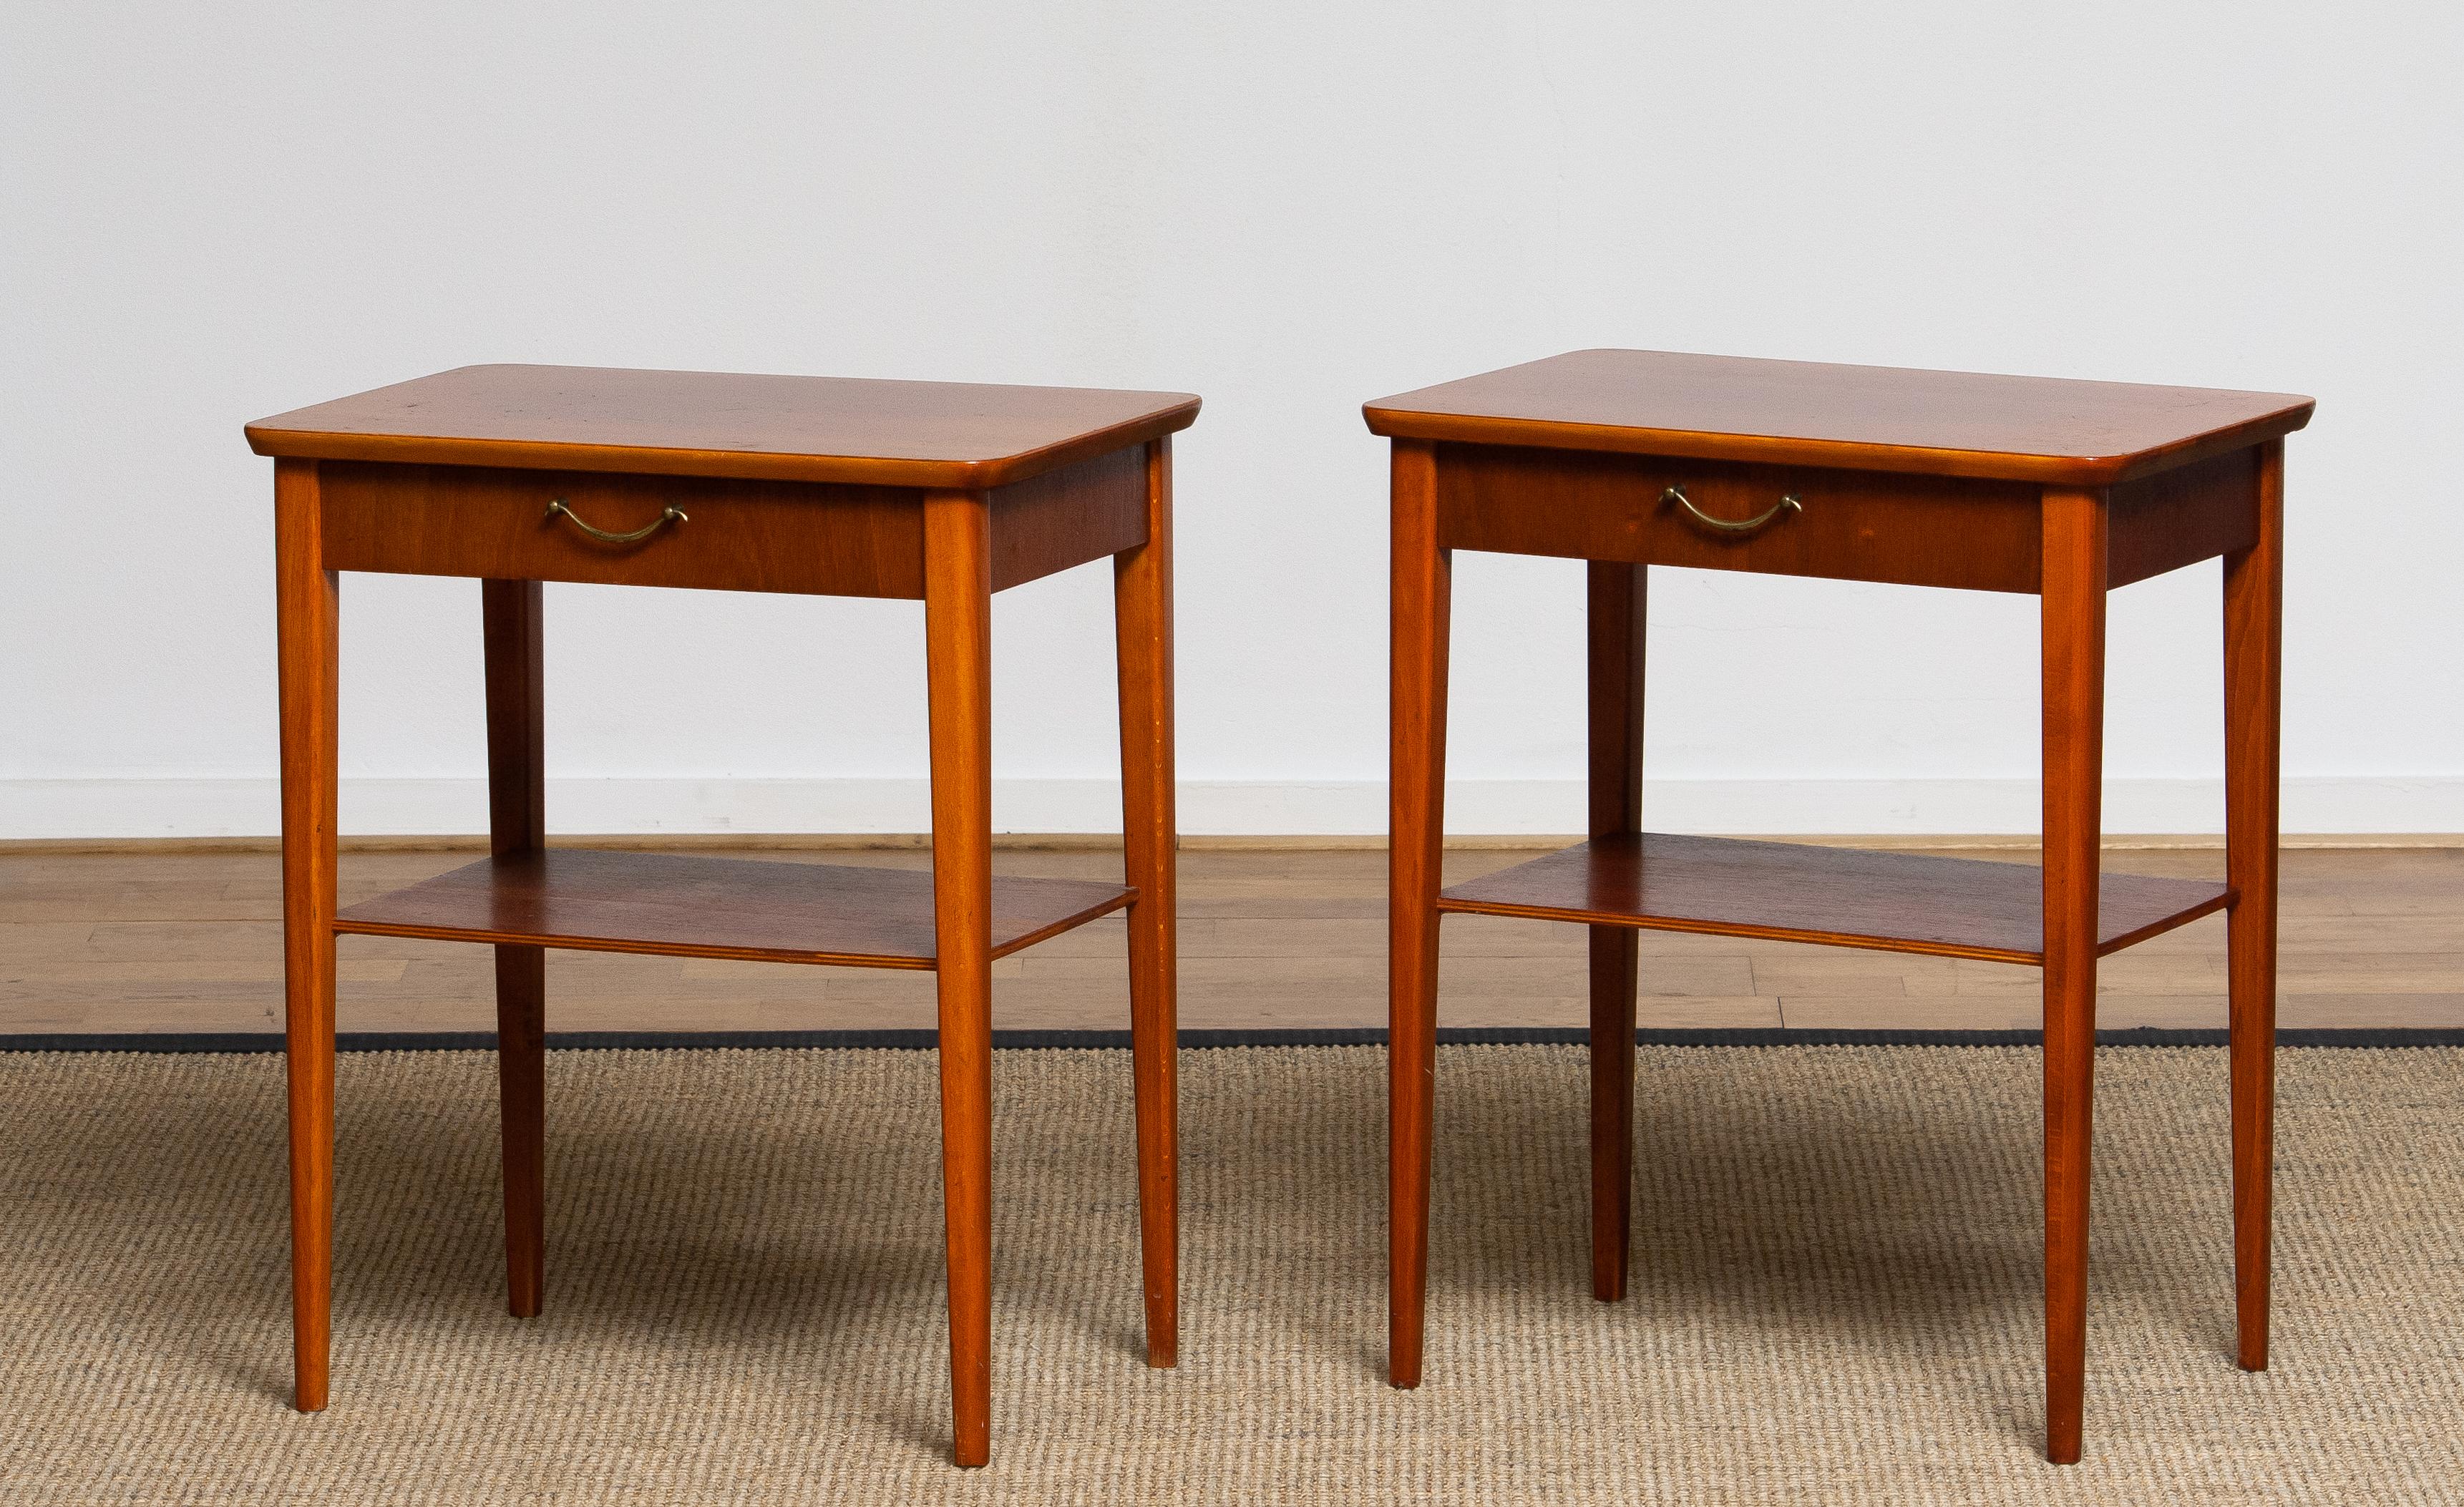 Beautiful and elegant set of two brass and mahogany nightstands made in Sweden, 1960s.
The set is matching pair and in good condition.